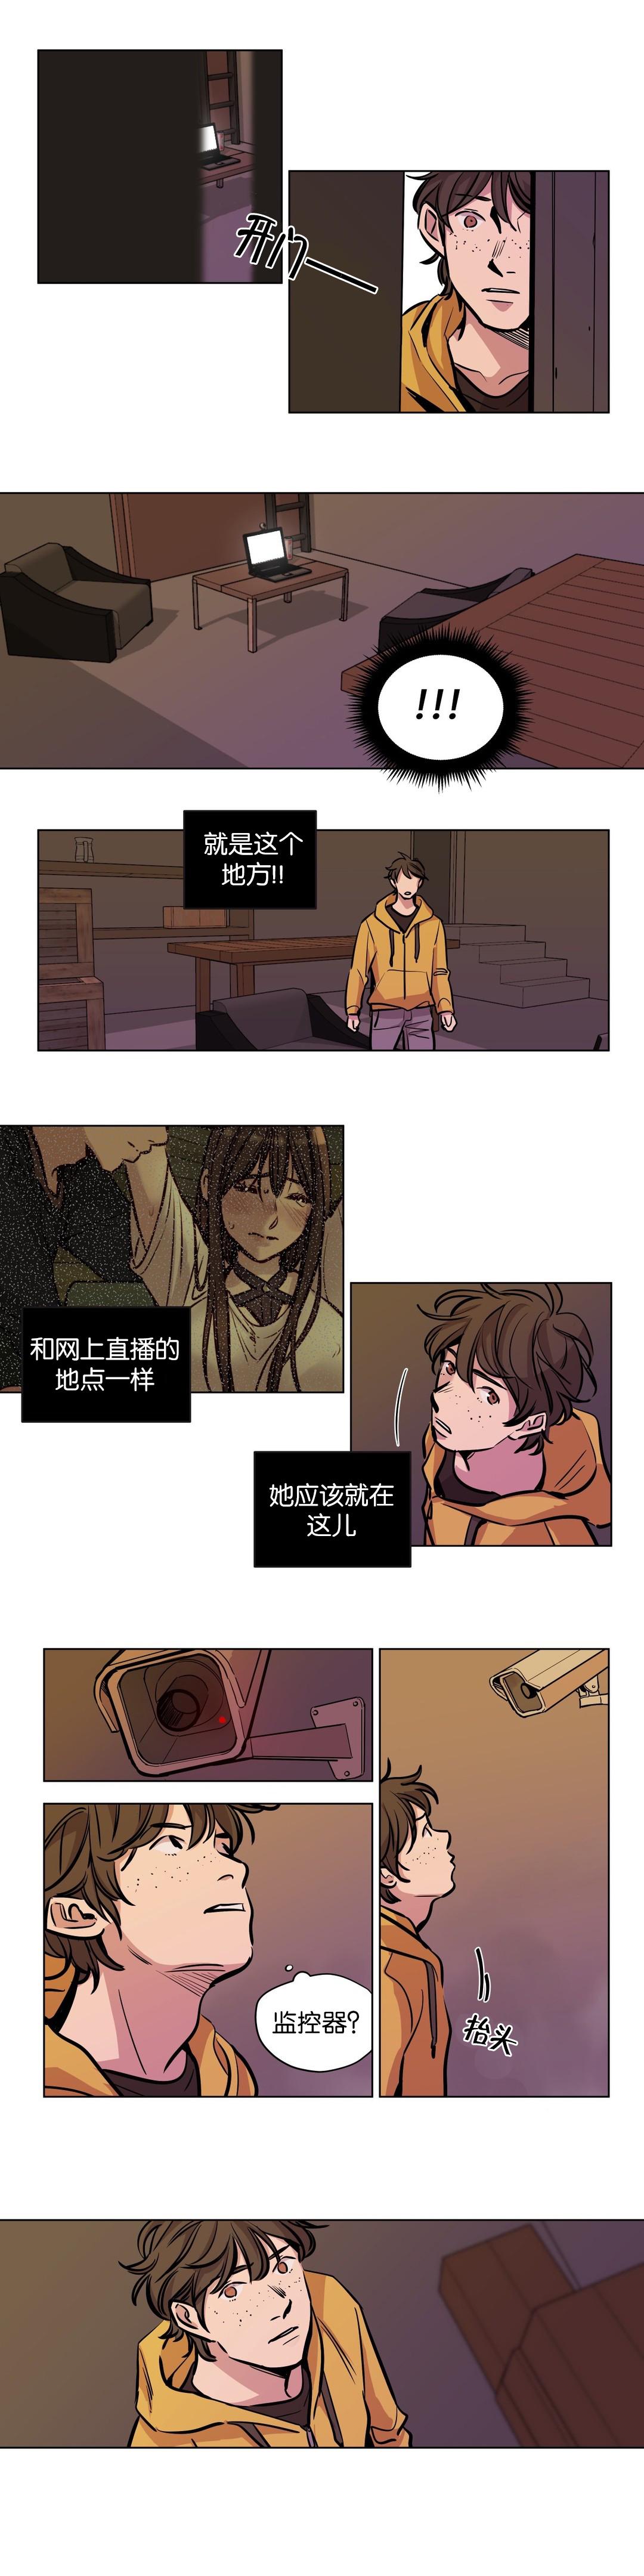 [Ramjak] 赎罪营(Atonement Camp) Ch.50-52 (Chinese) 14